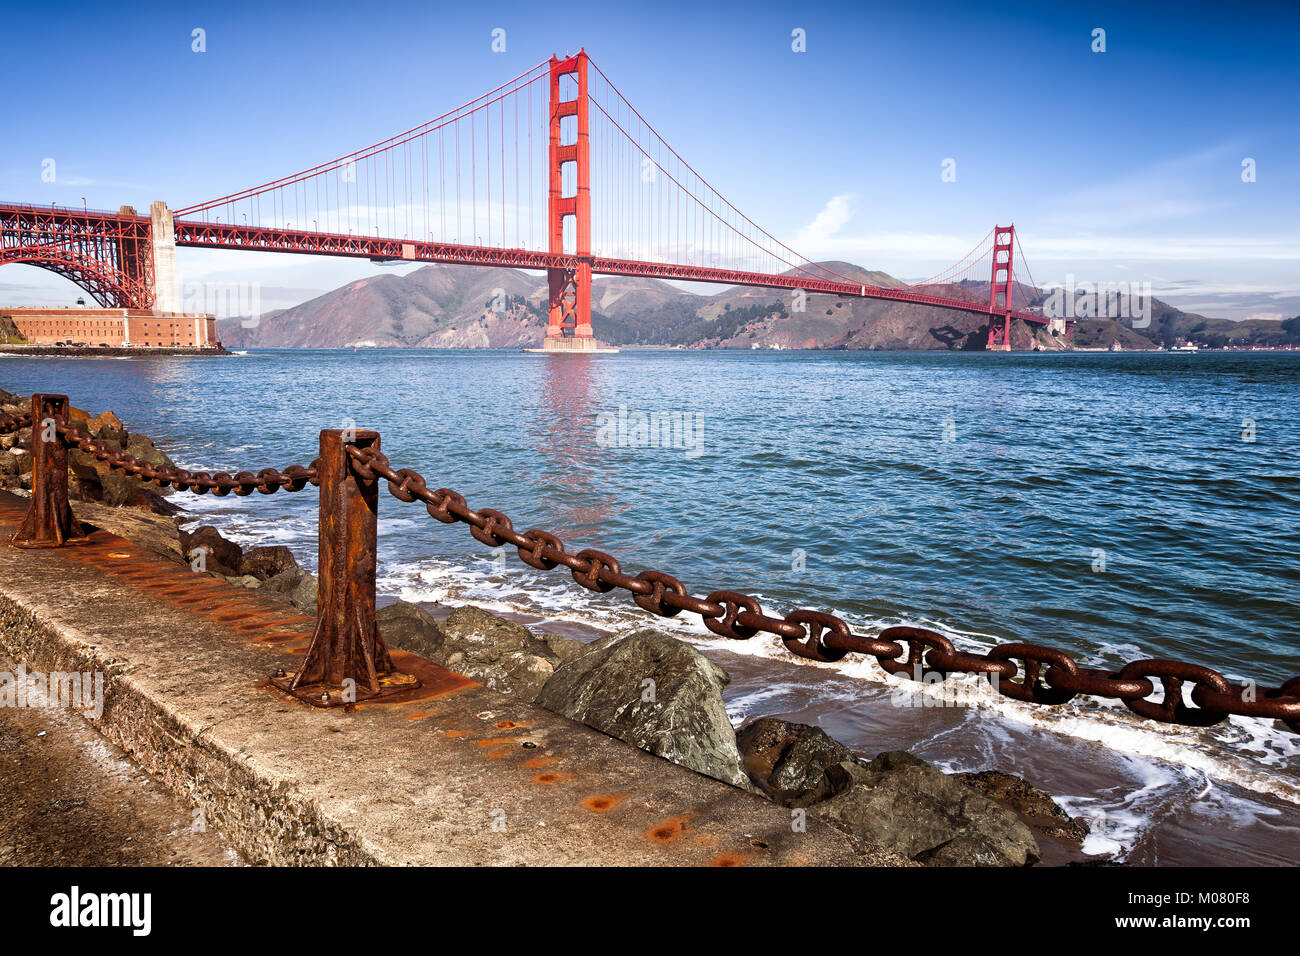 Golden Gate Bridge view. Foreground at water's edge, with a heavy rusty chain guardrail that echoes the shape of the bridge. Vintage color. Stock Photo